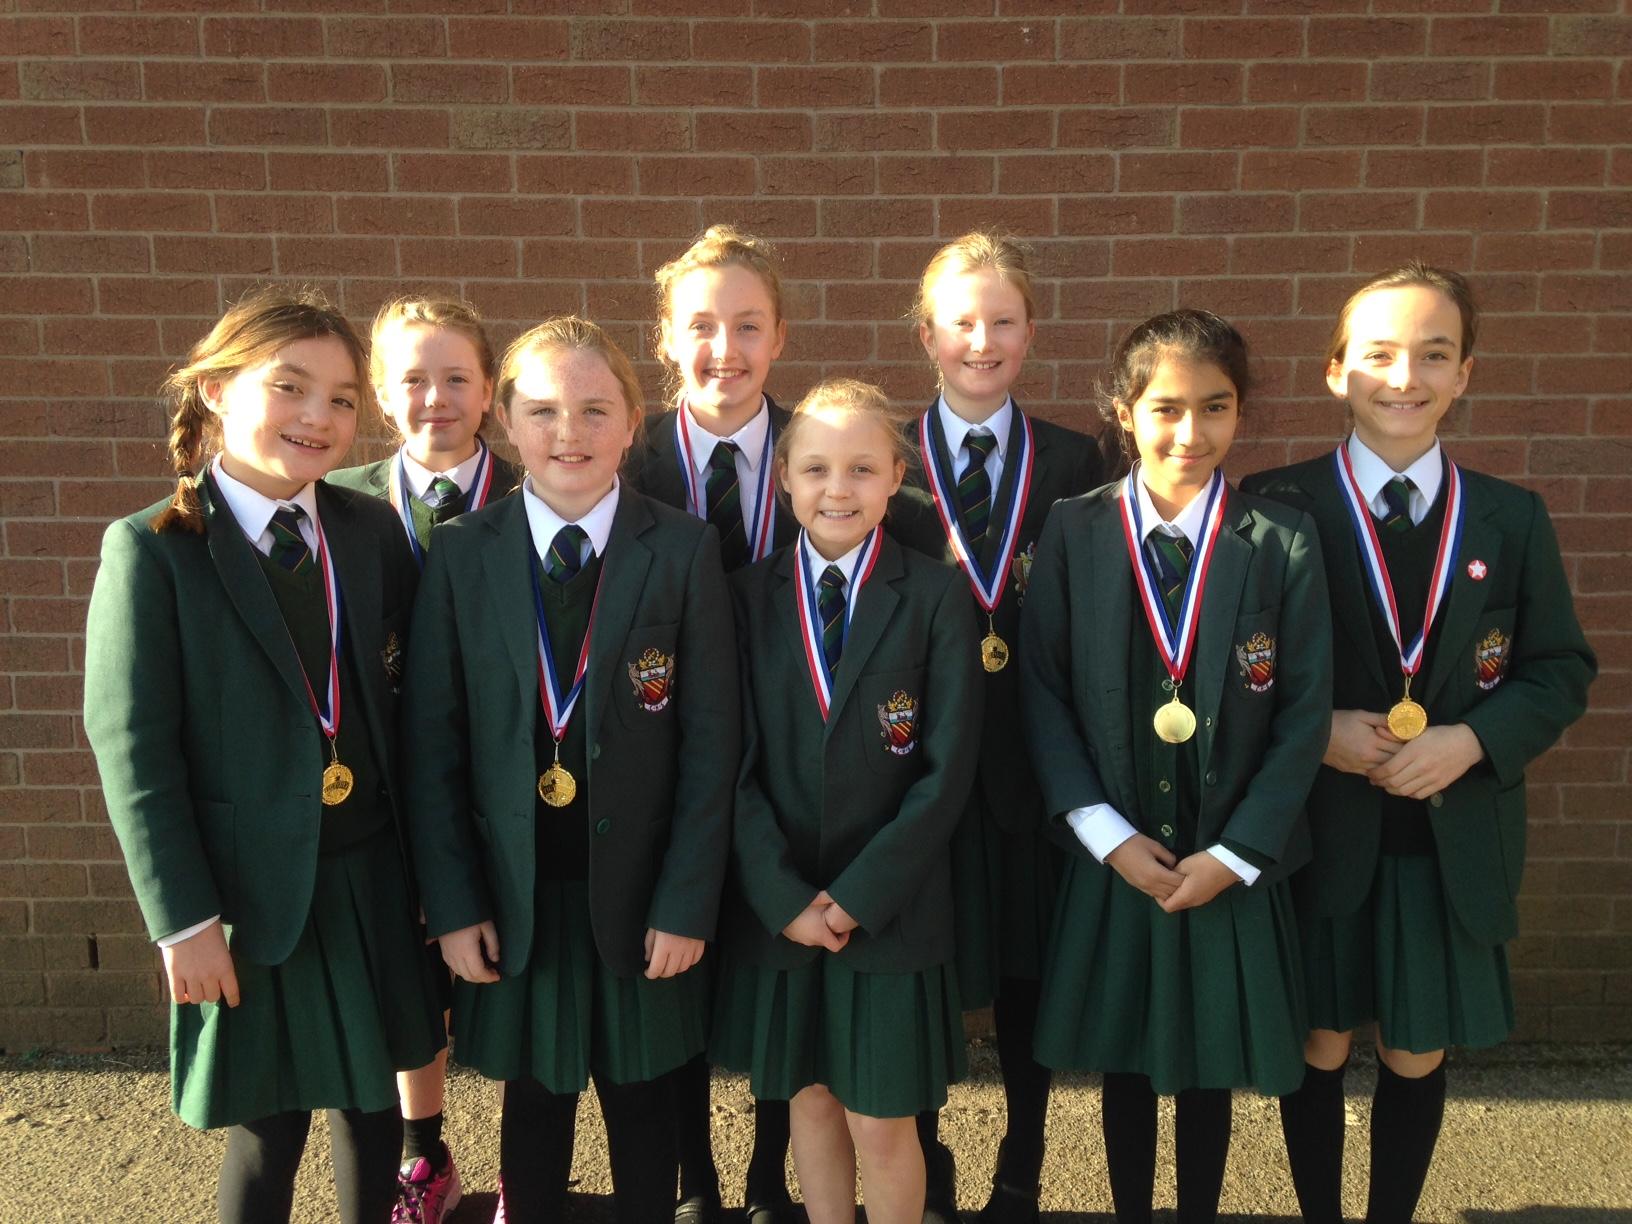 Year 5 Junior pupils at cheadle hulme school show off their gold medals after winning at the U10s North West Area Netball Tournament